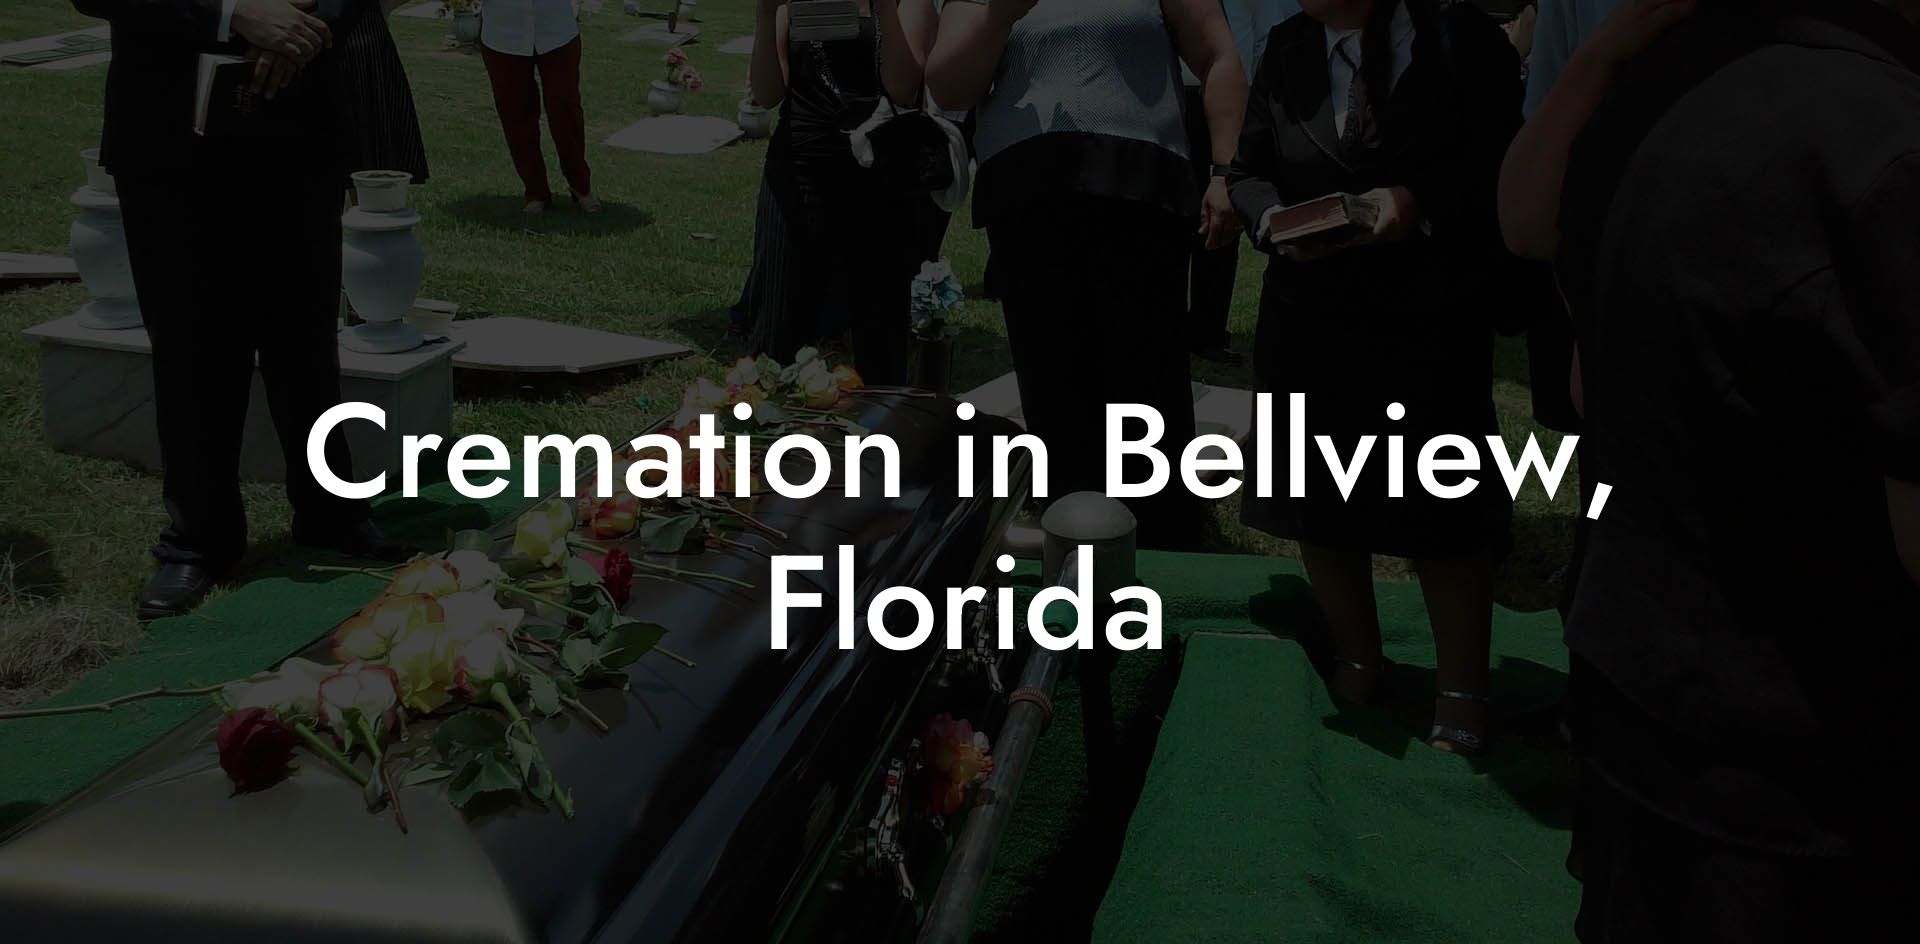 Cremation in Bellview, Florida